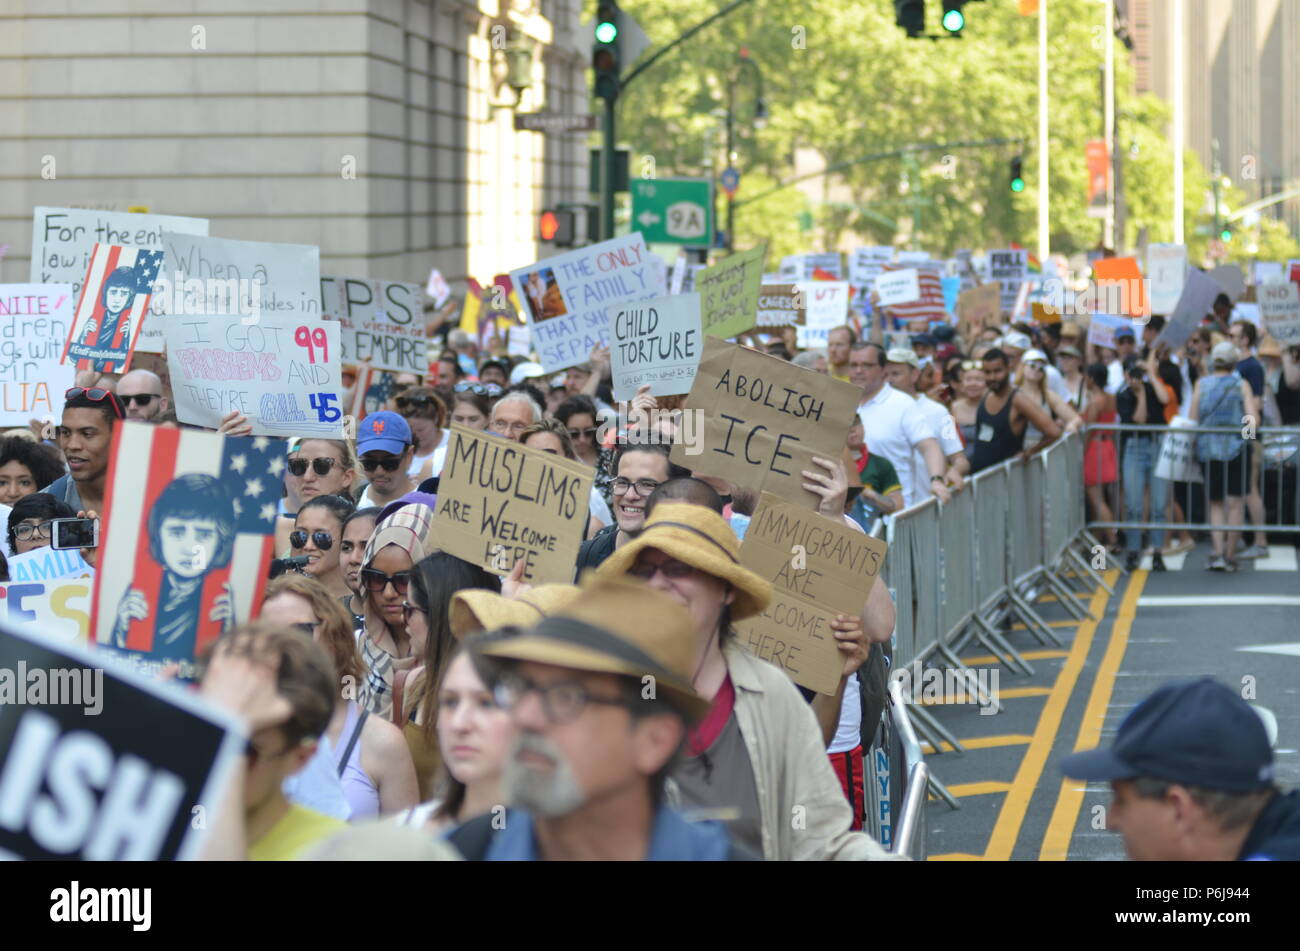 Manhattan, New York, USA. 30th June, 2018. Thousands of demonstrators and immigrant rights activists gathered at Foley Square in Lower Manhattan for the rally against ICE and immigrants deportation to keep families together. Credit: Ryan Rahman/Alamy Live News Stock Photo